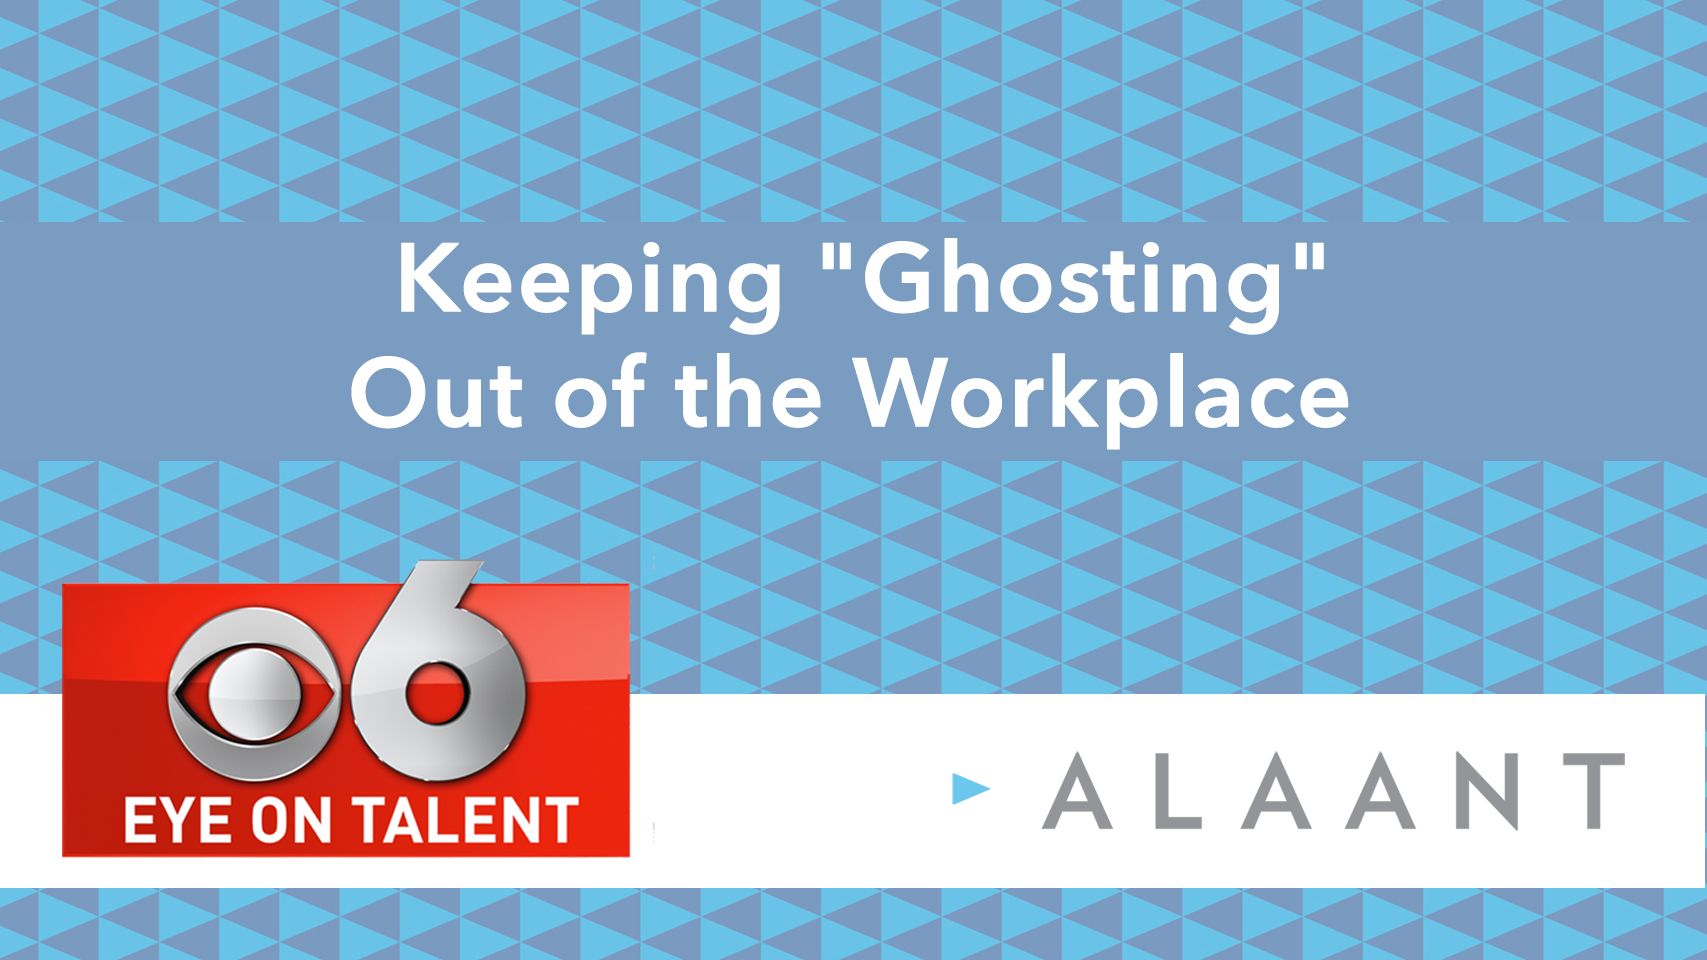 Alaant Eye on Talent Keeping "Ghosting" Out of the Workplace